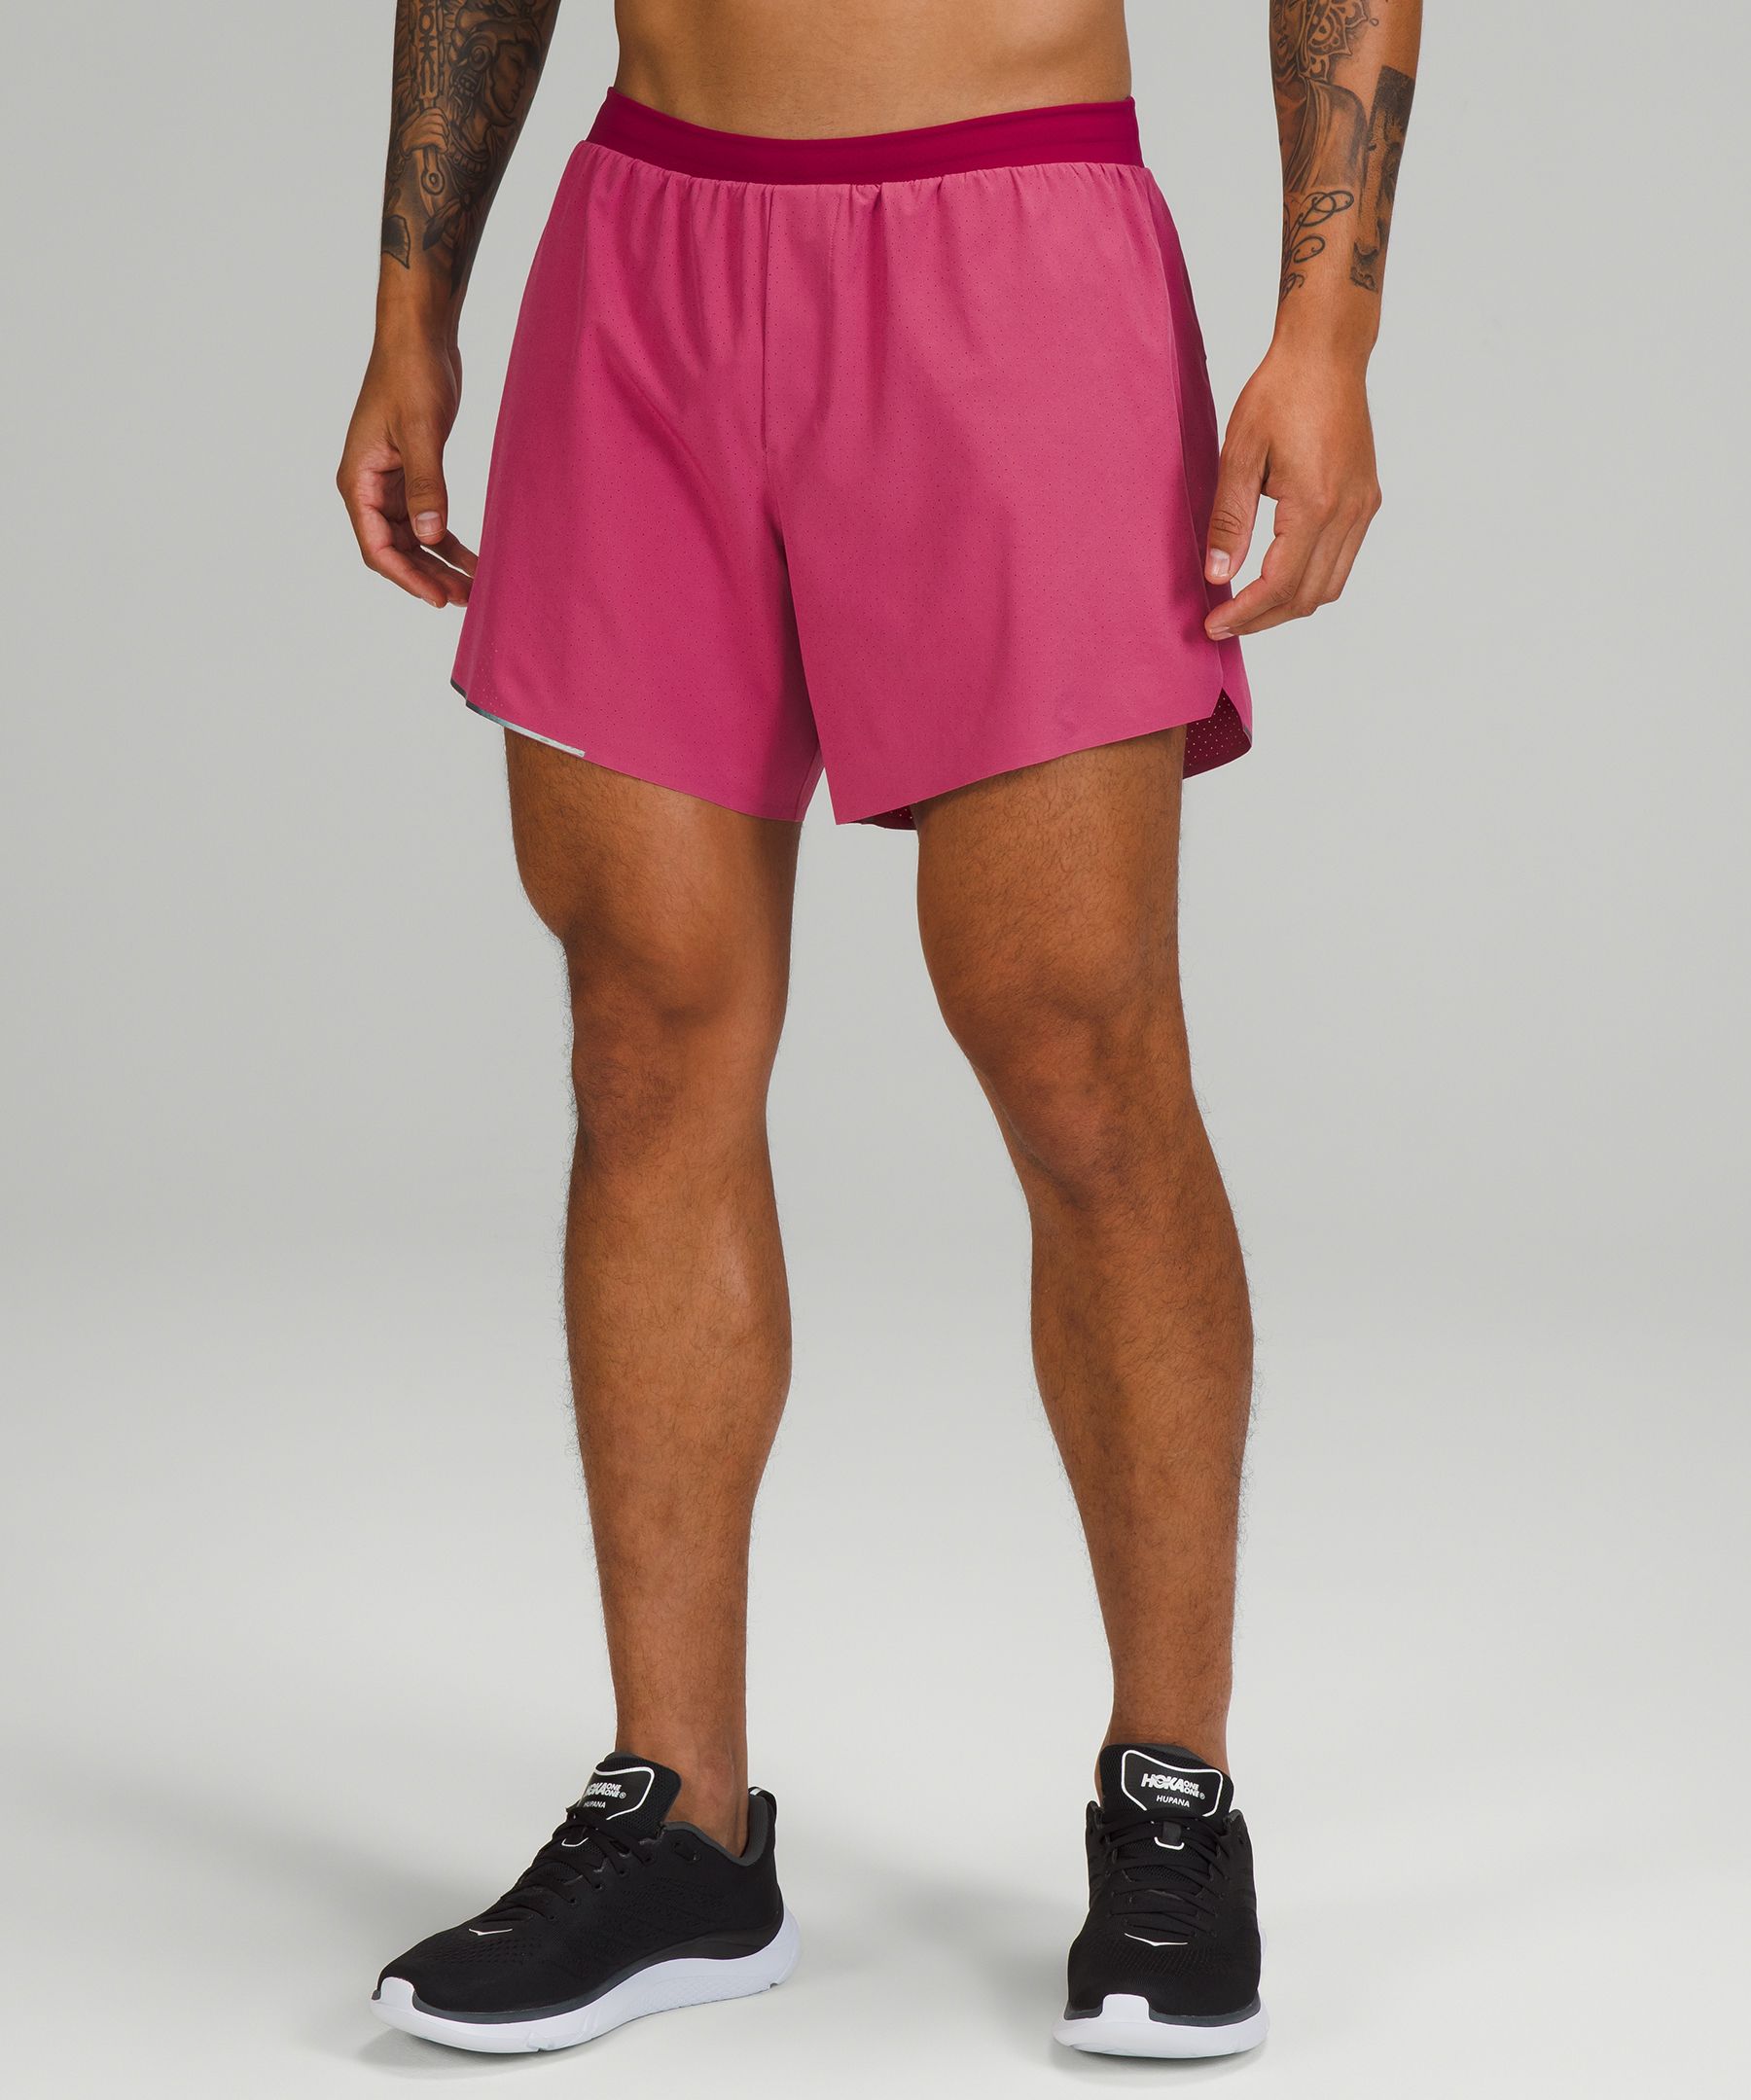 Lululemon Fast And Free Lined Shorts 6" In Pink Lychee